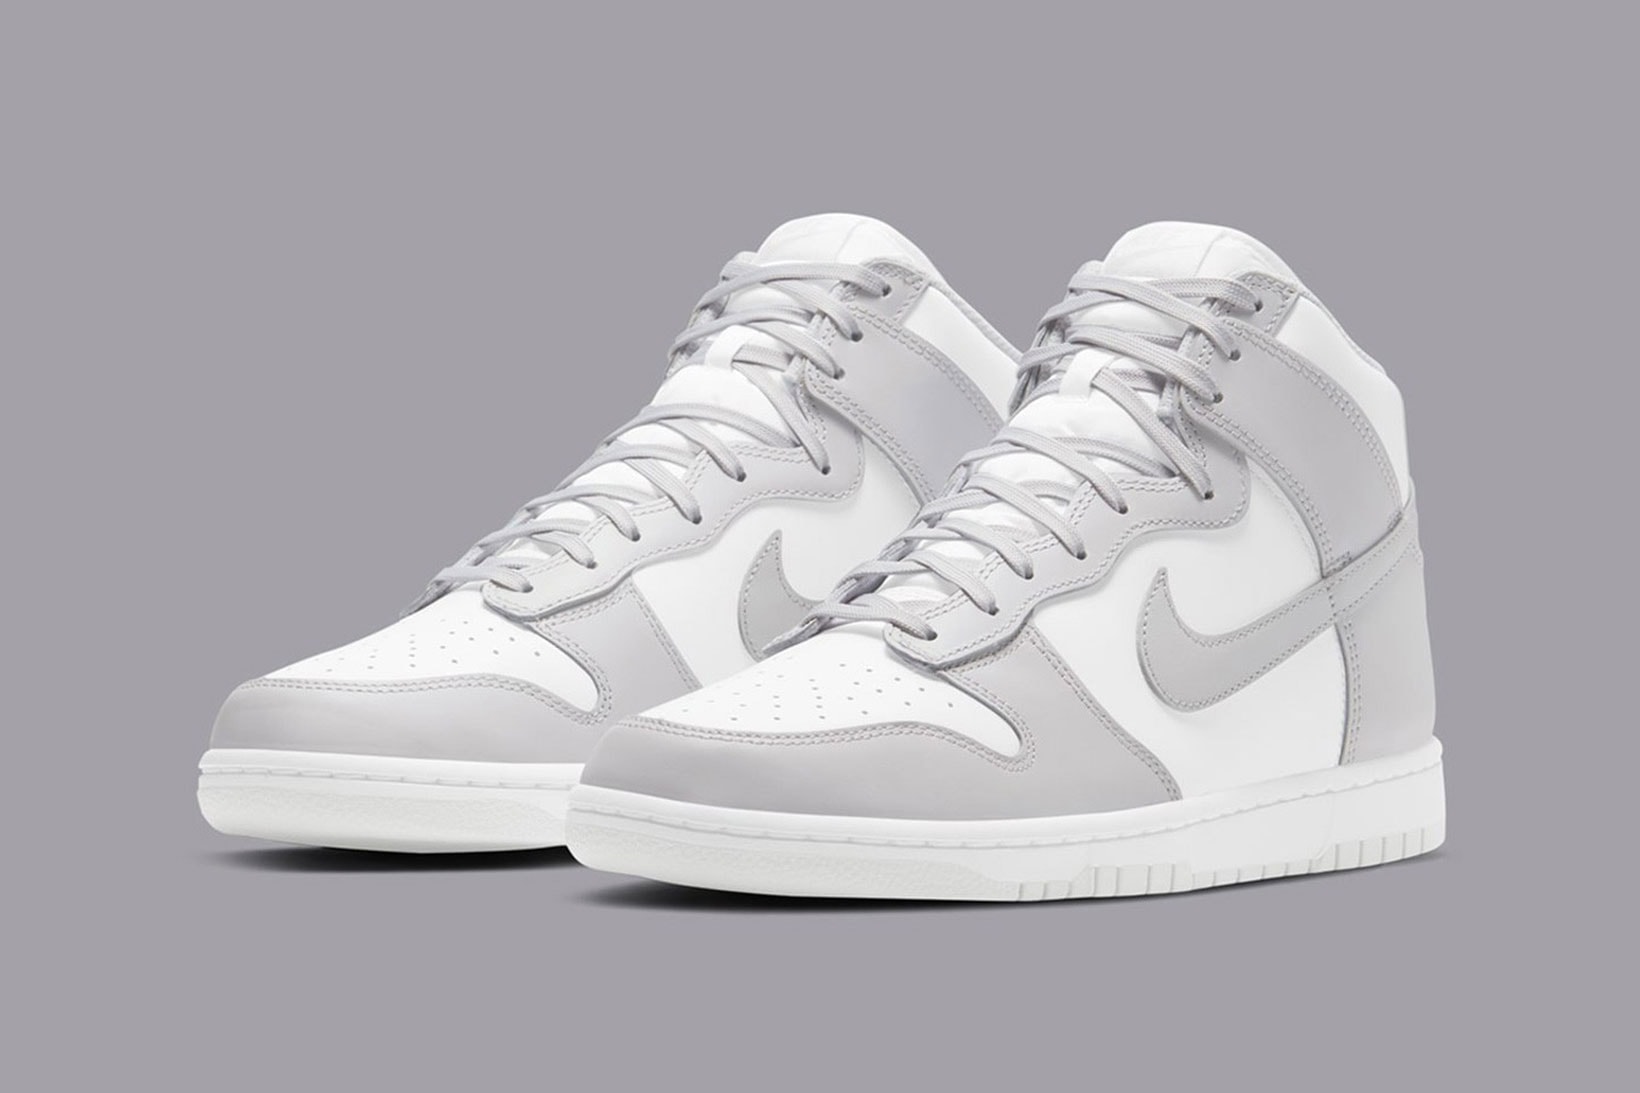 nike dunk high new colorway 2021 release vast grey gray white